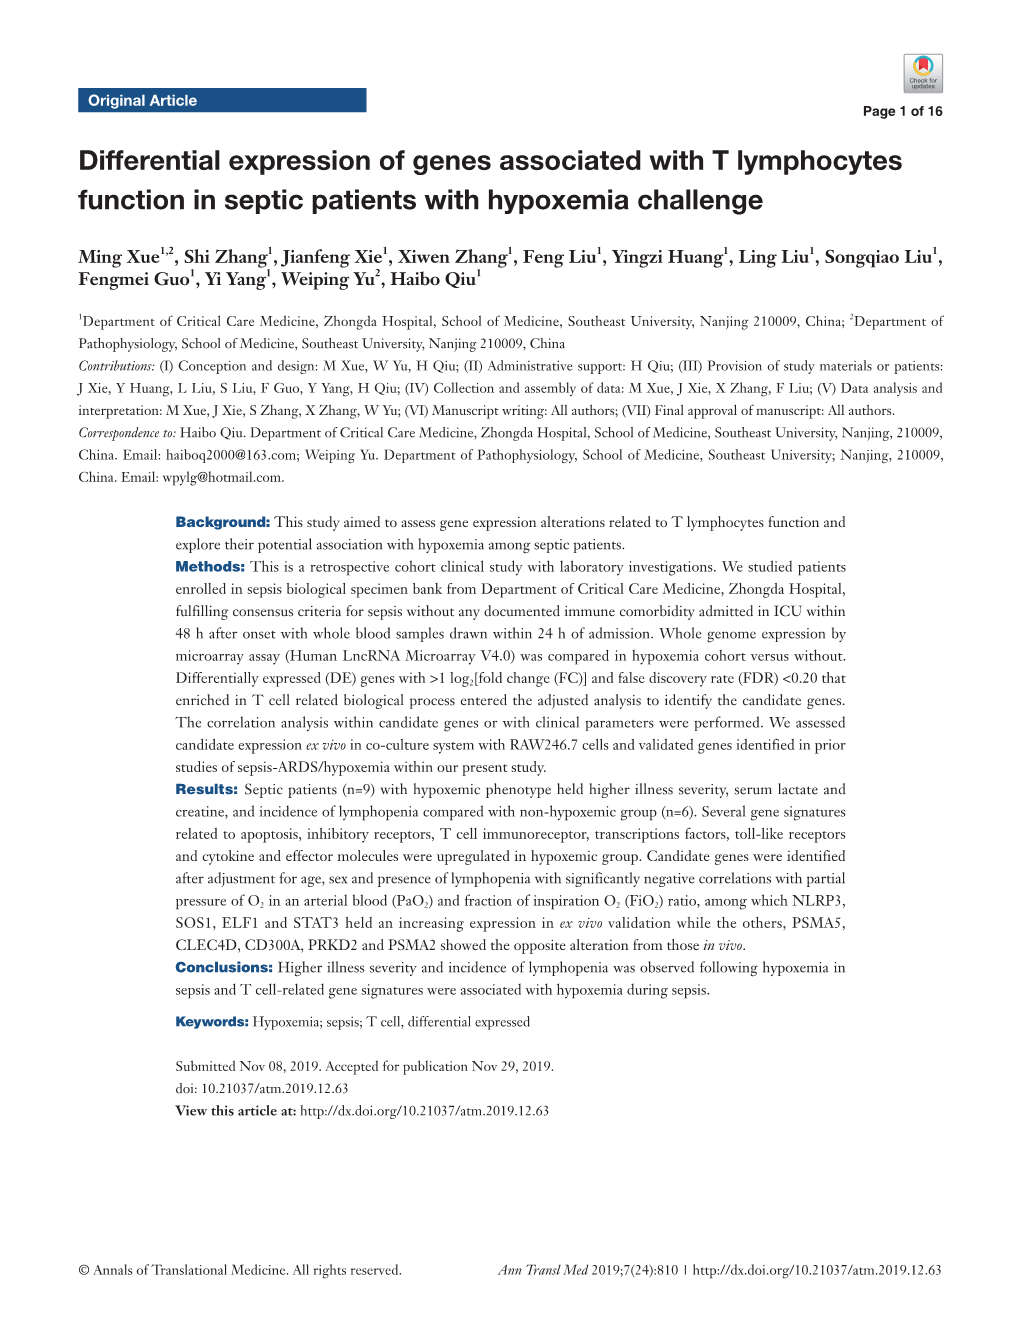 Differential Expression of Genes Associated with T Lymphocytes Function in Septic Patients with Hypoxemia Challenge